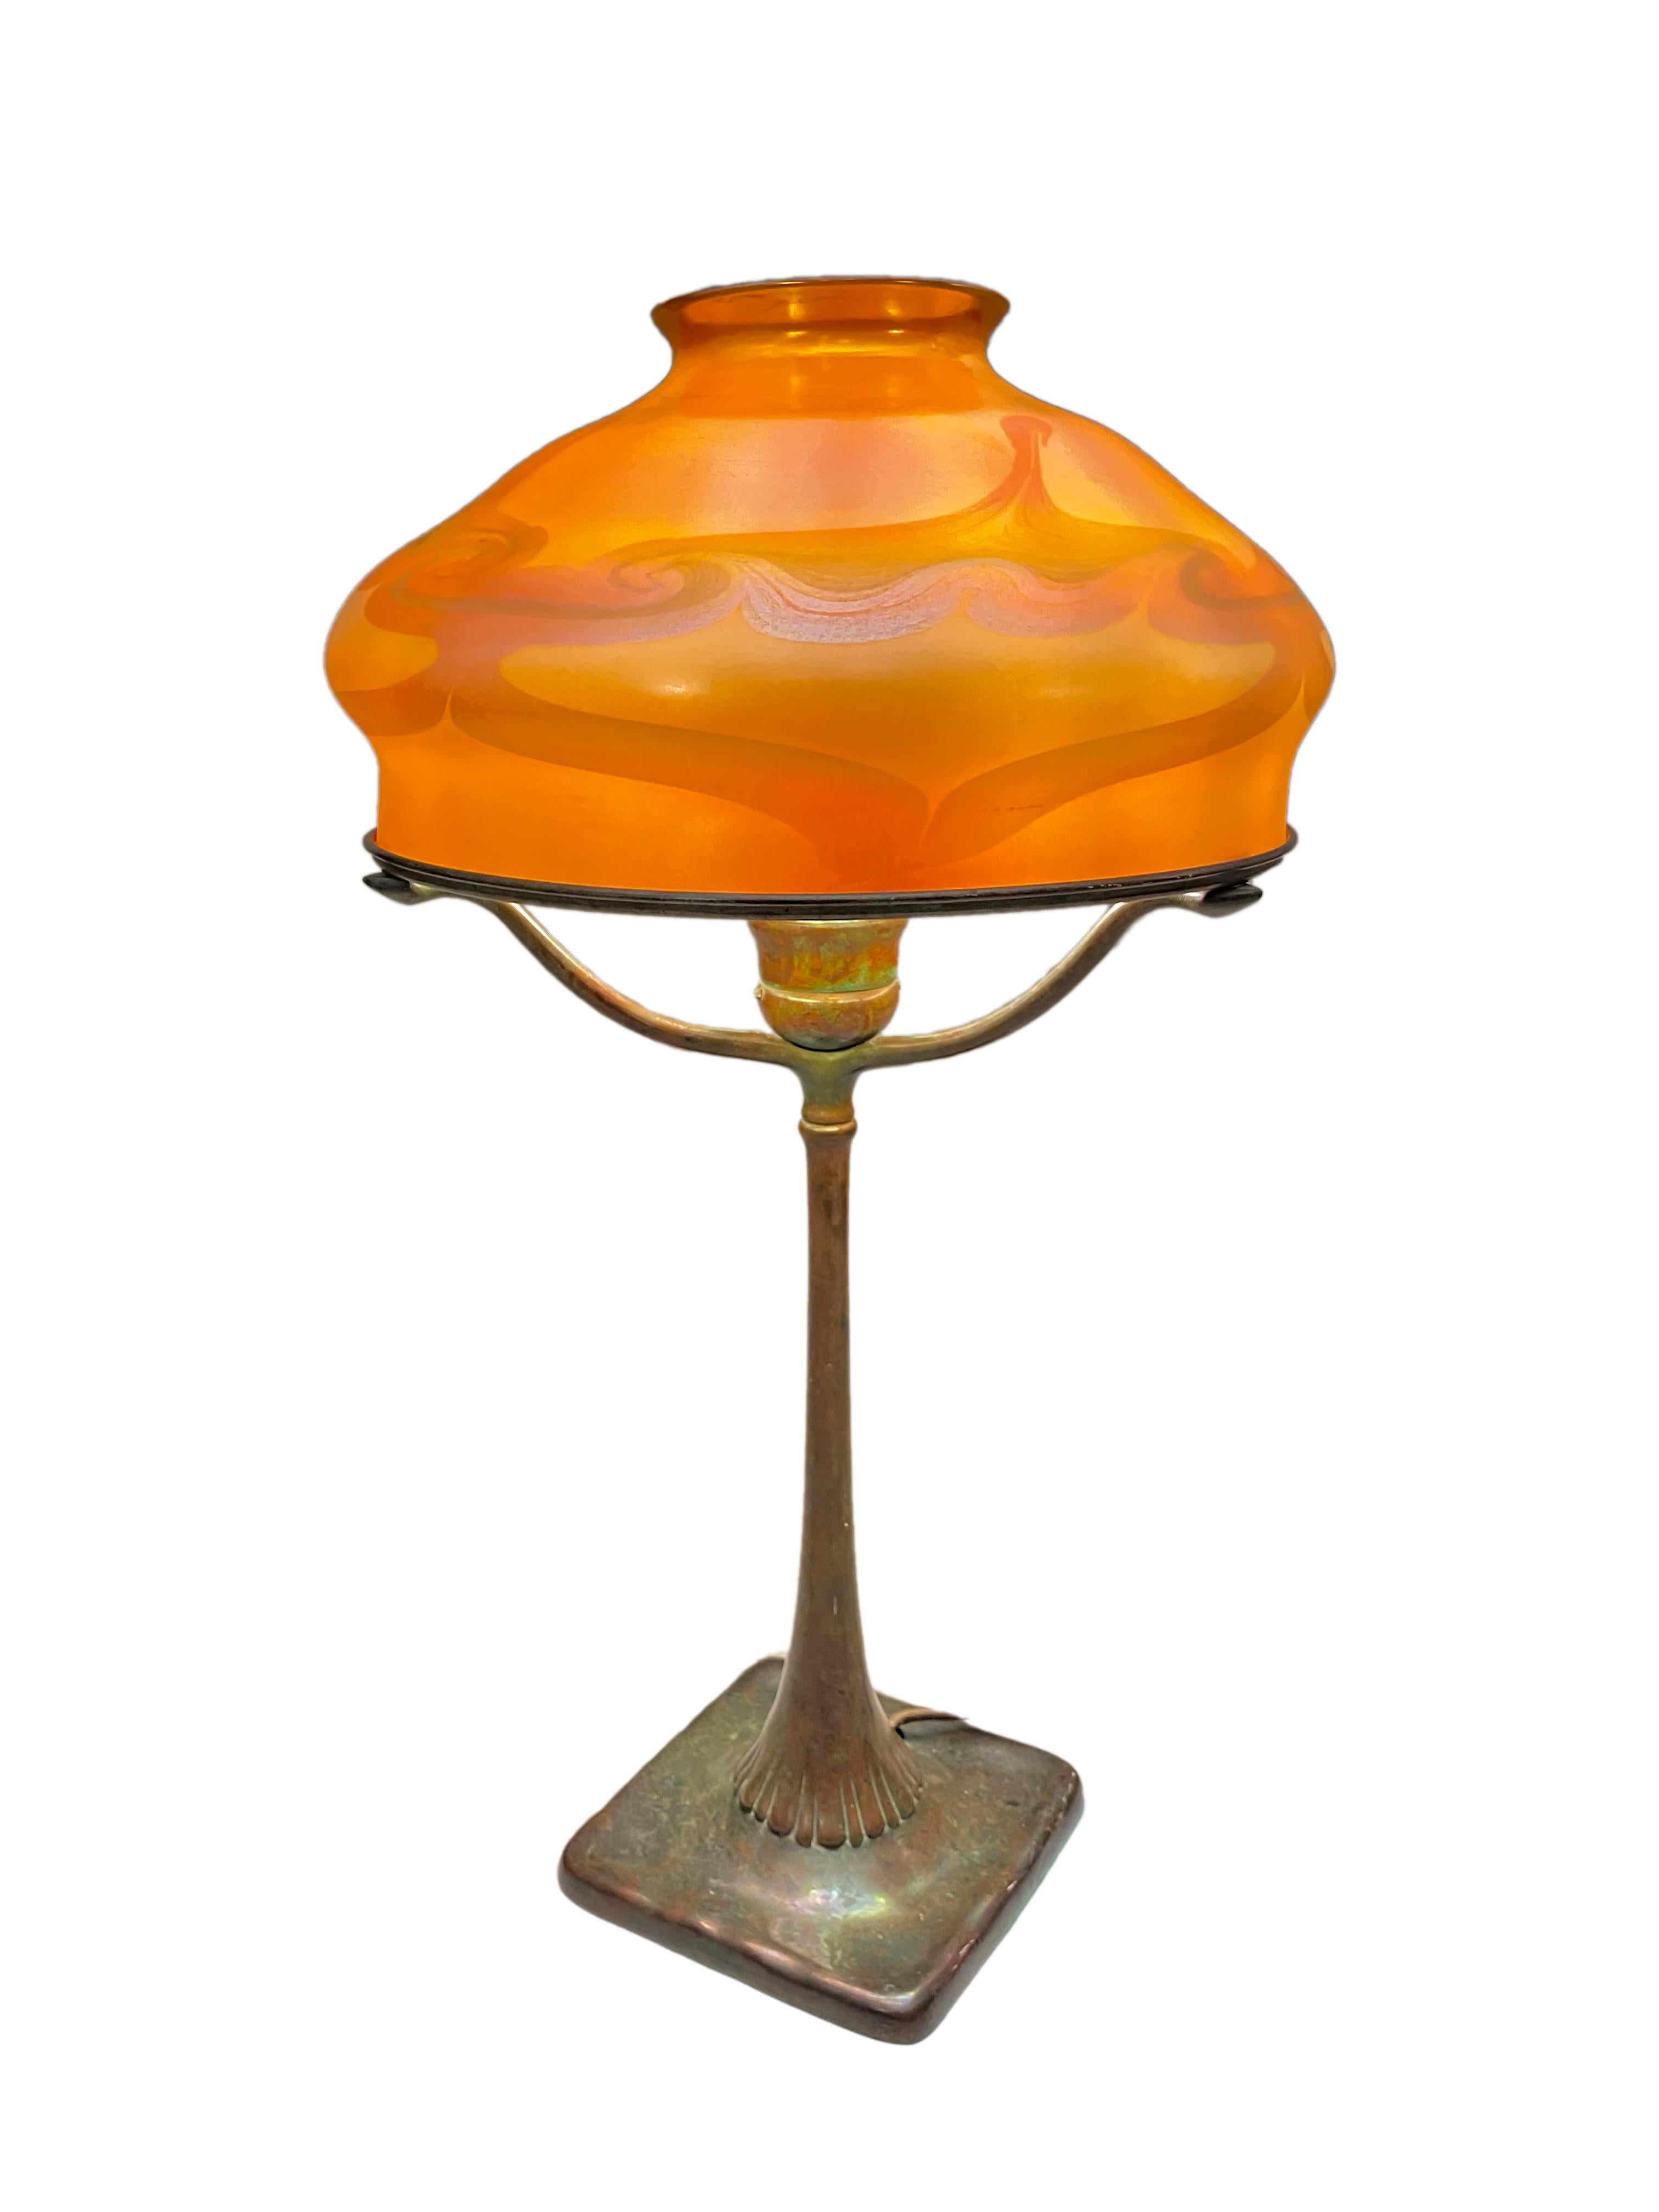 A Tiffany Favrile and bronze Art Nouveau desk lamp by, Tiffany Studios decorated with an early, reactive and heavily iridescent Tiffany Favrile art glass shade with iridescent purple-pink and green-yellow stylized pulled feather decoration